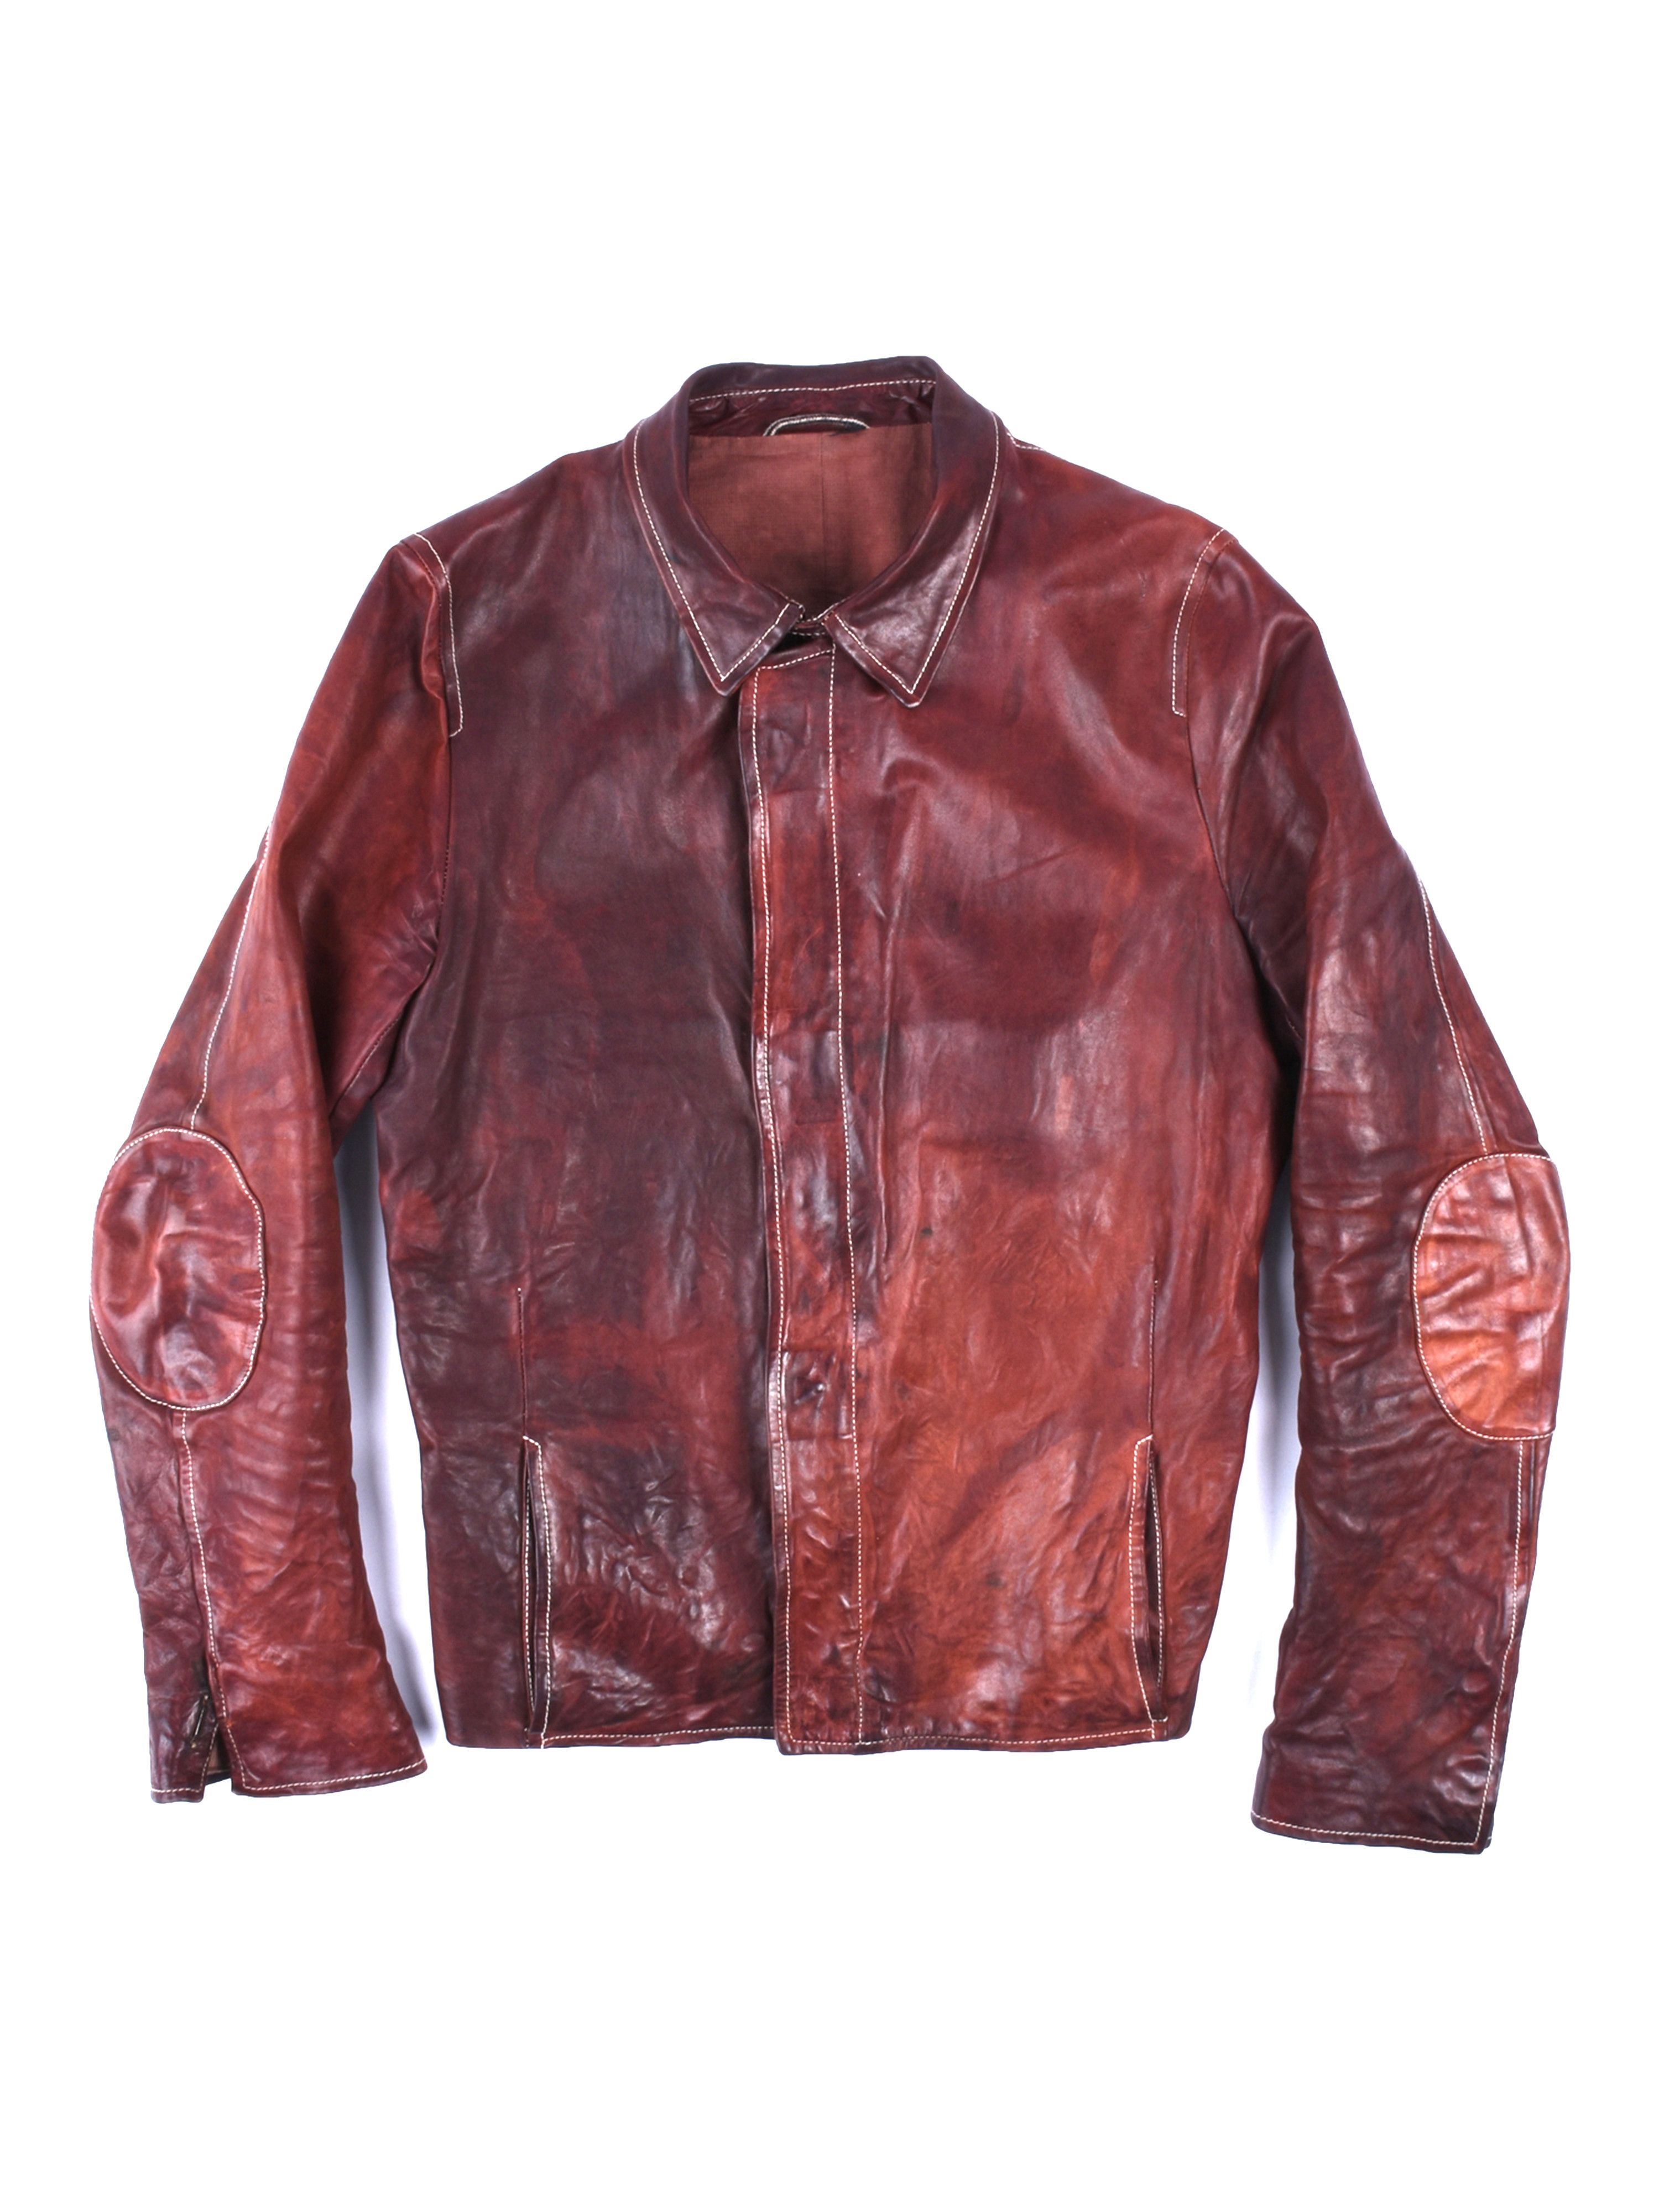 Carol Christian Poell Leather Jacket | Grailed